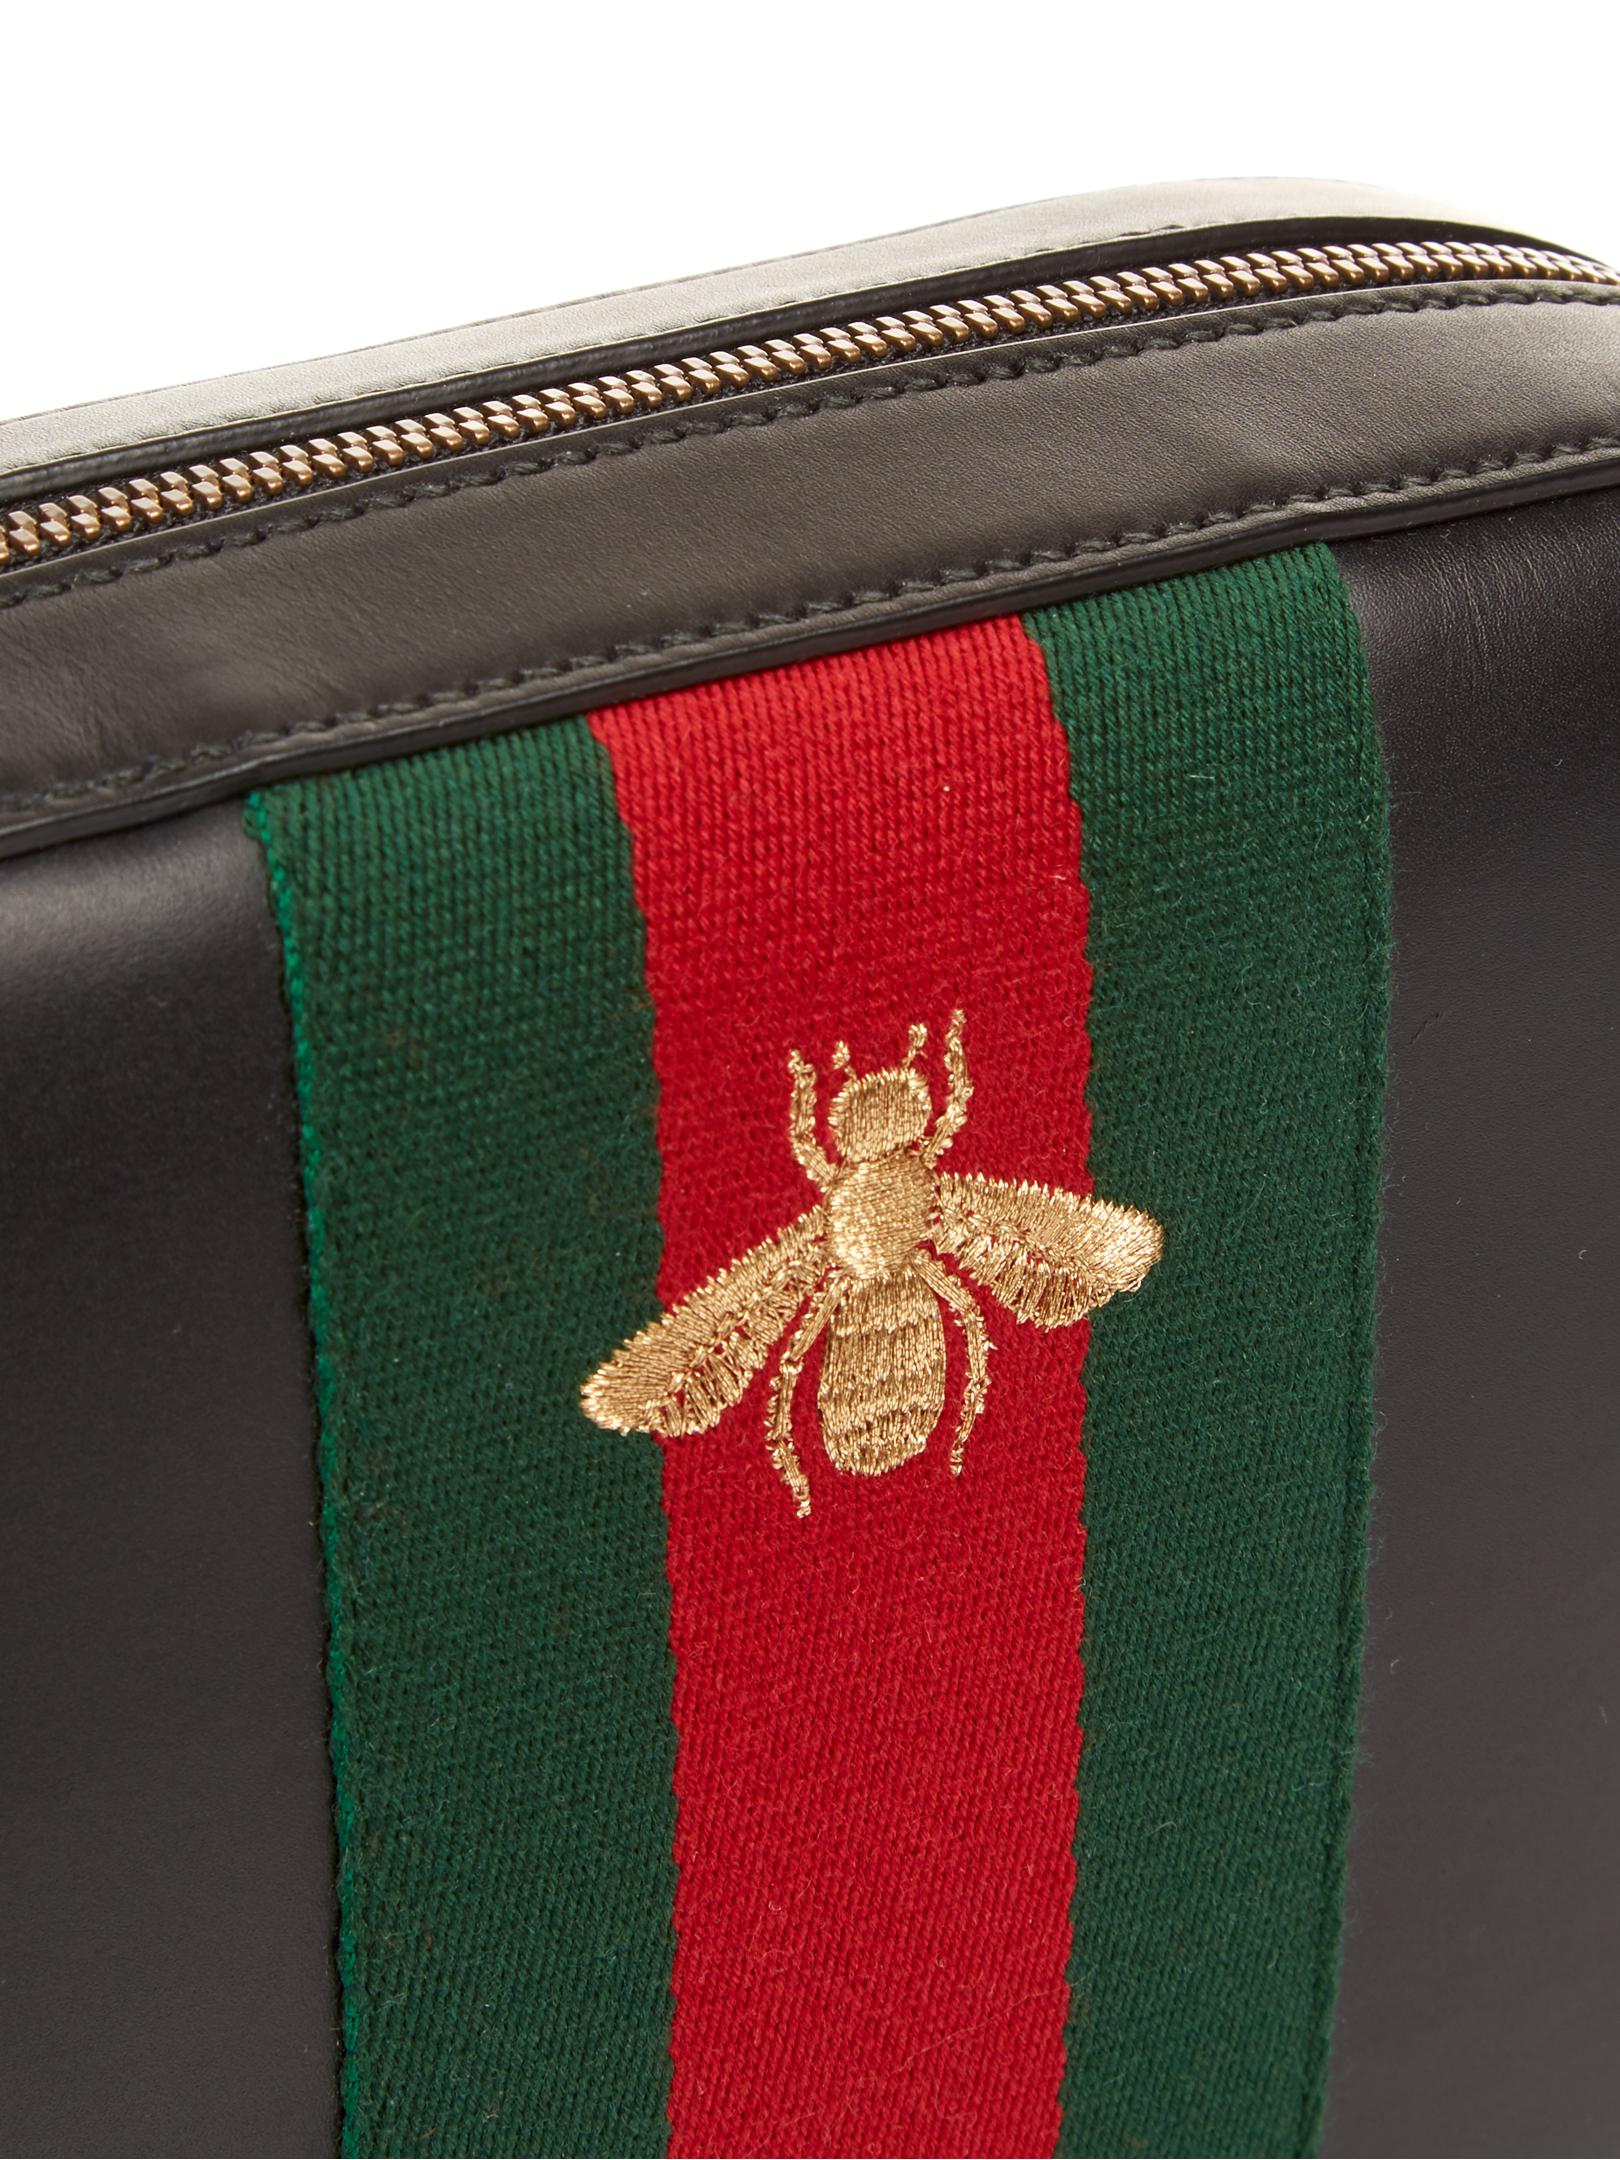 Gucci Bee-embroidered Leather Cross-body Bag in Black | Lyst